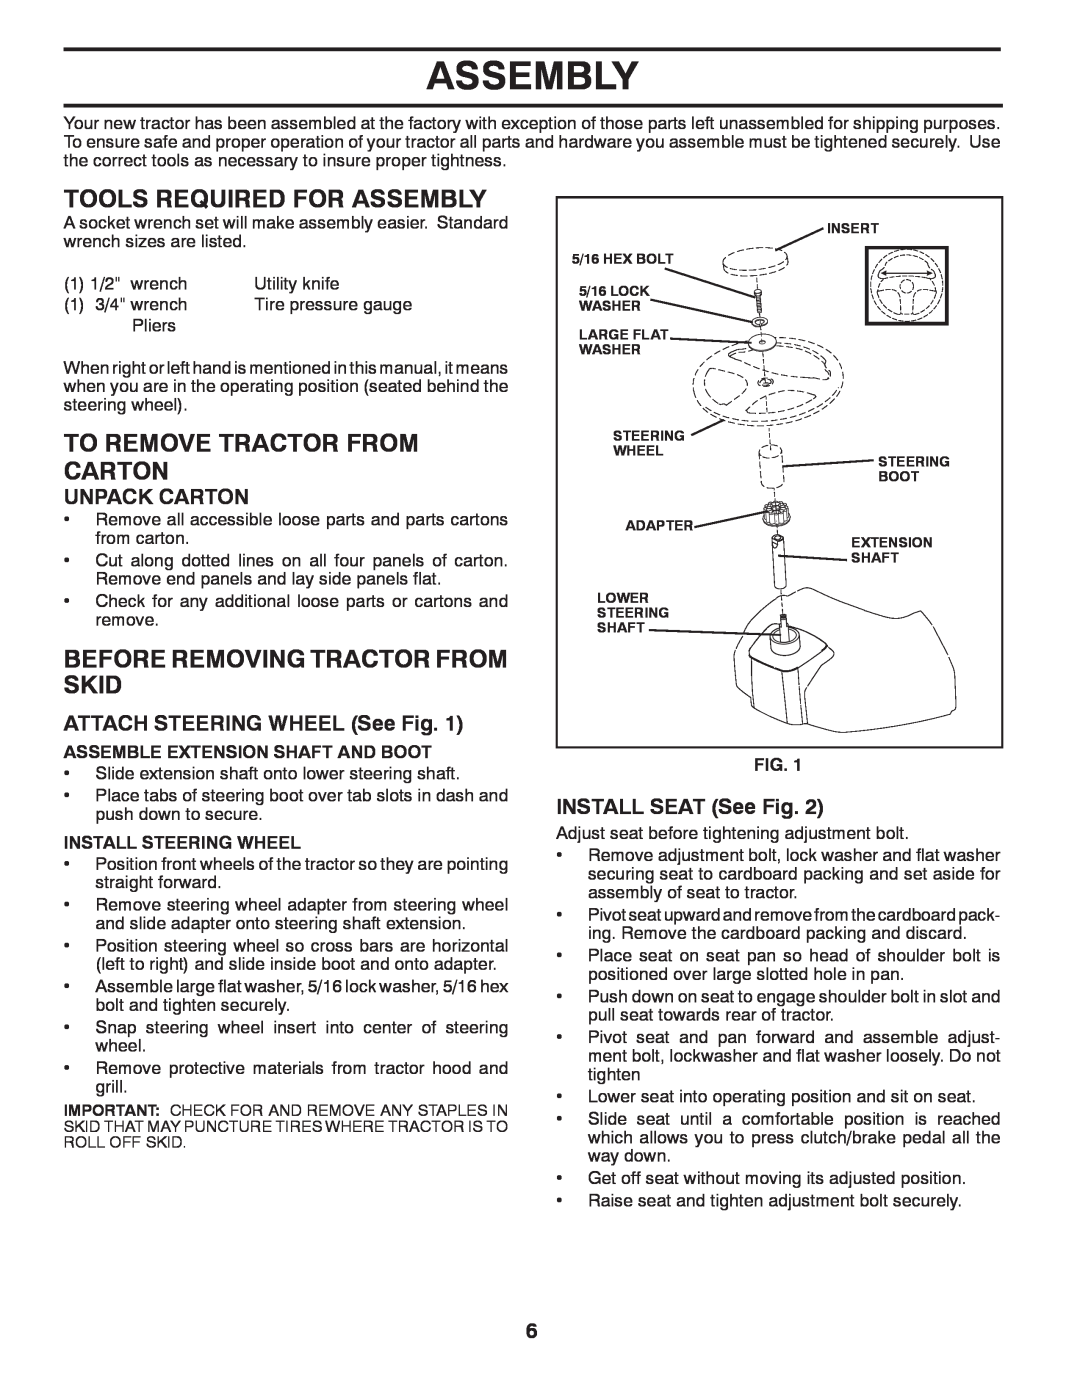 Poulan 425179 manual Tools Required For Assembly, To Remove Tractor From Carton, Before Removing Tractor From Skid 